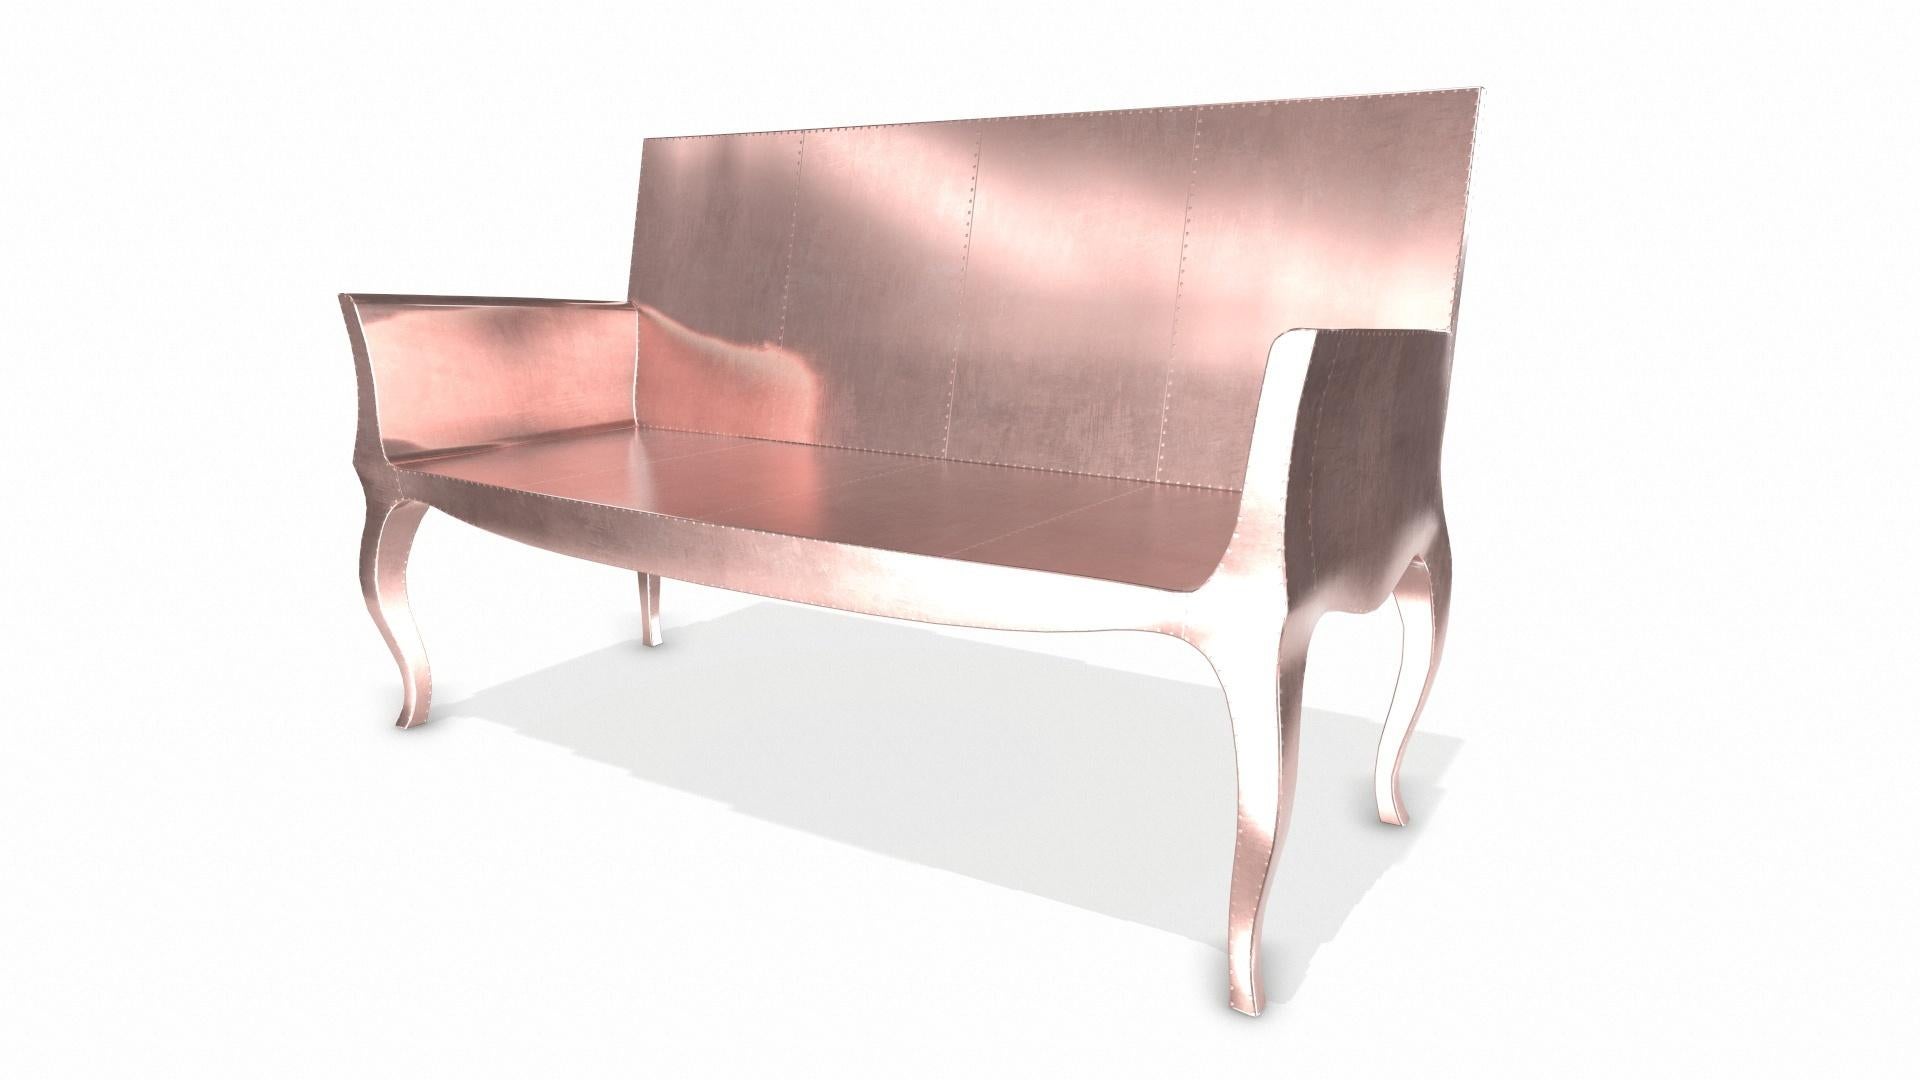 American Louise Settee Art Deco Benches in Smooth Copper by Paul Mathieu for S Odegard For Sale